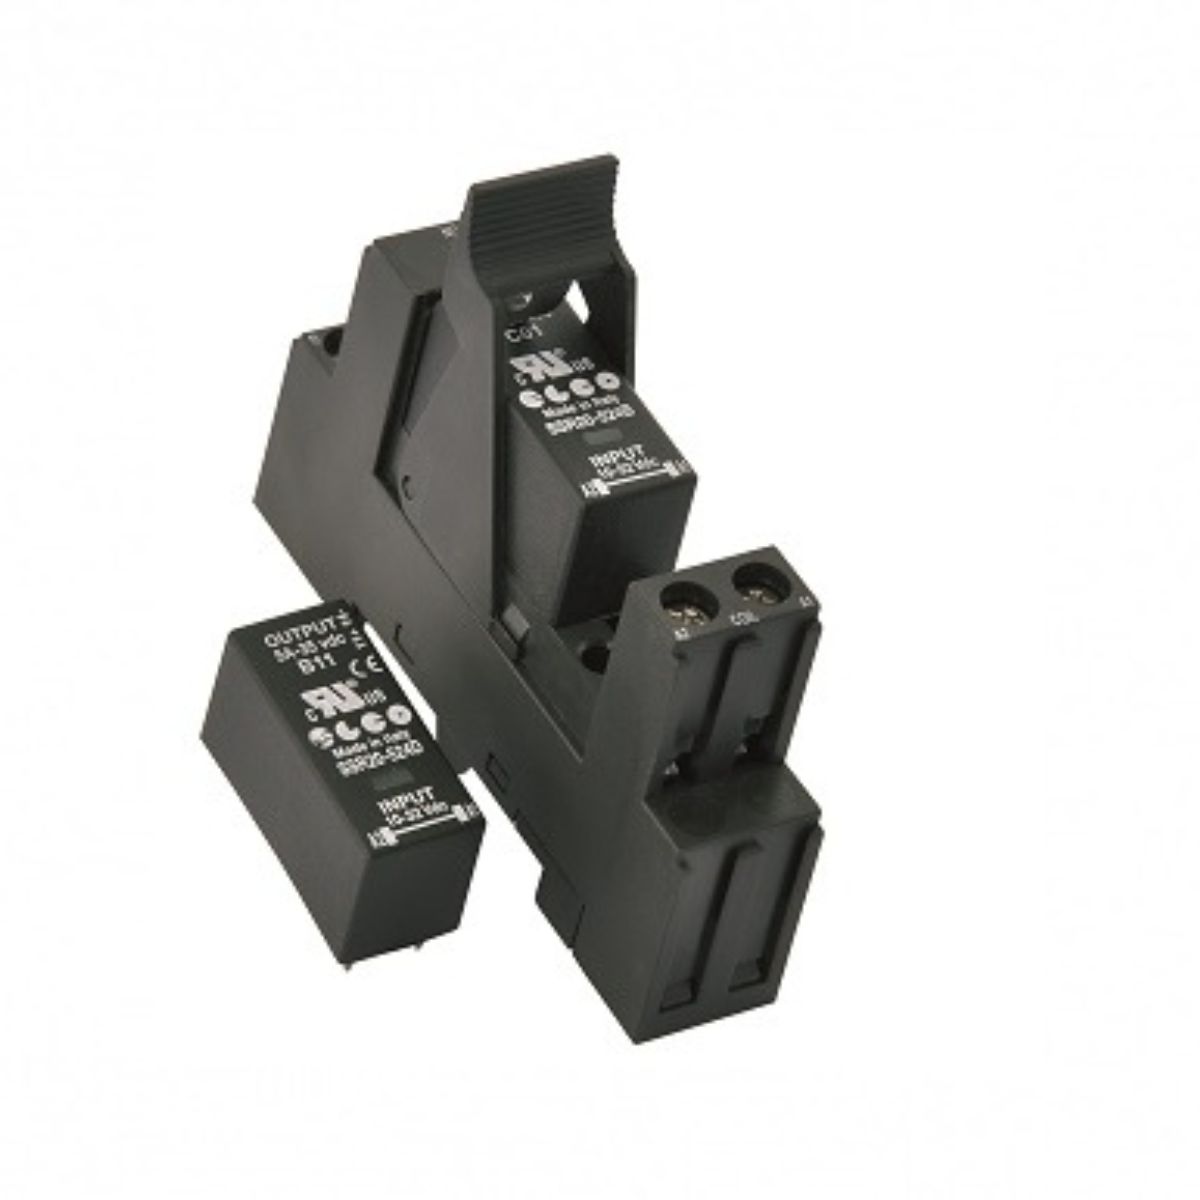 SSR 20/21 SERIES SOLID STATE RELAYS